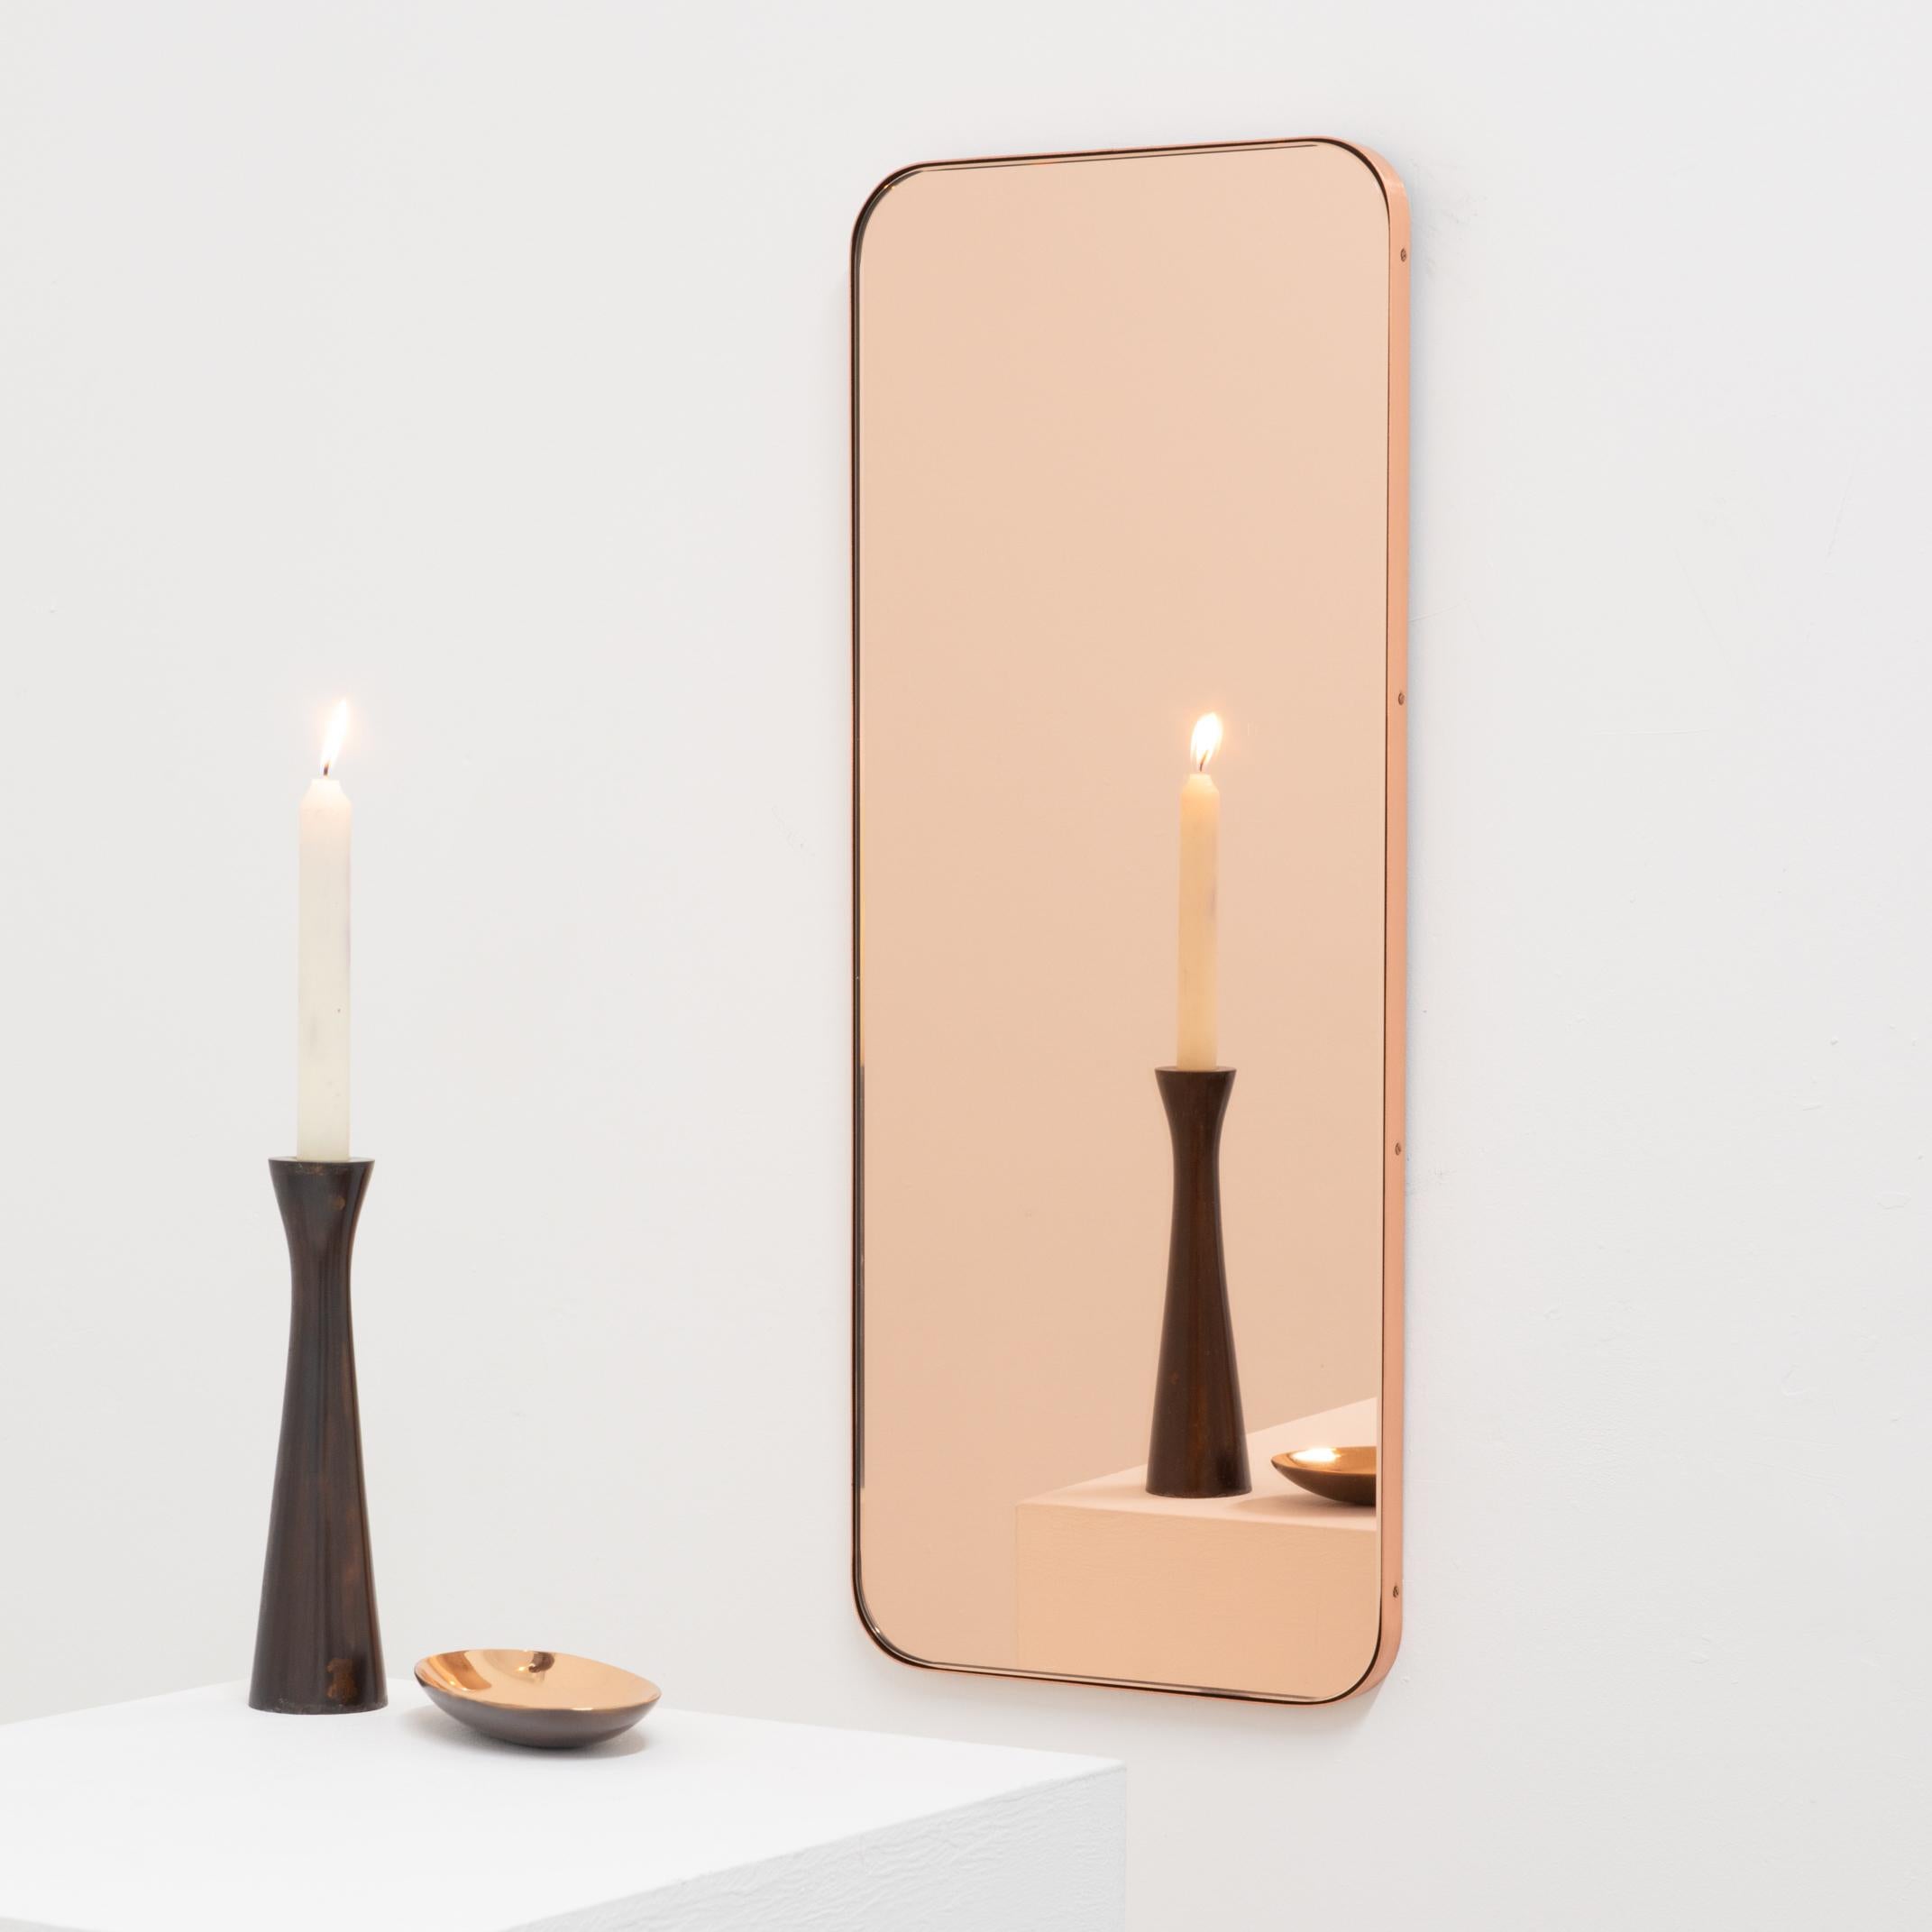 Quadris Rectangular Rose Gold Contemporary Mirror with a Copper Frame, Small For Sale 2